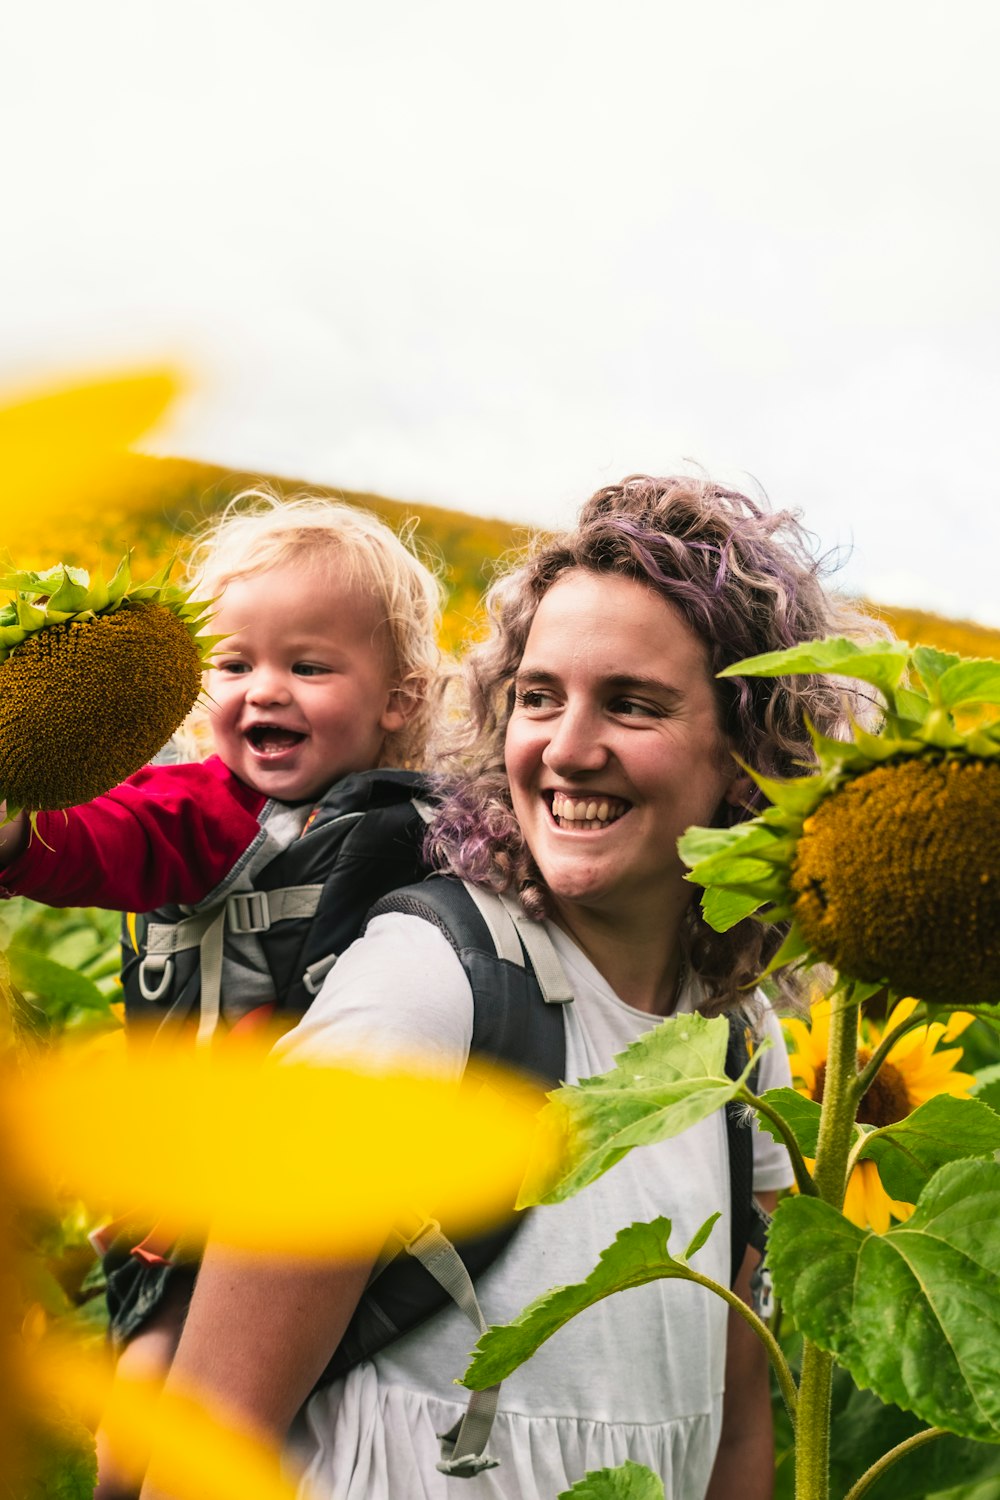 woman in white shirt carrying baby in yellow sunflower field during daytime